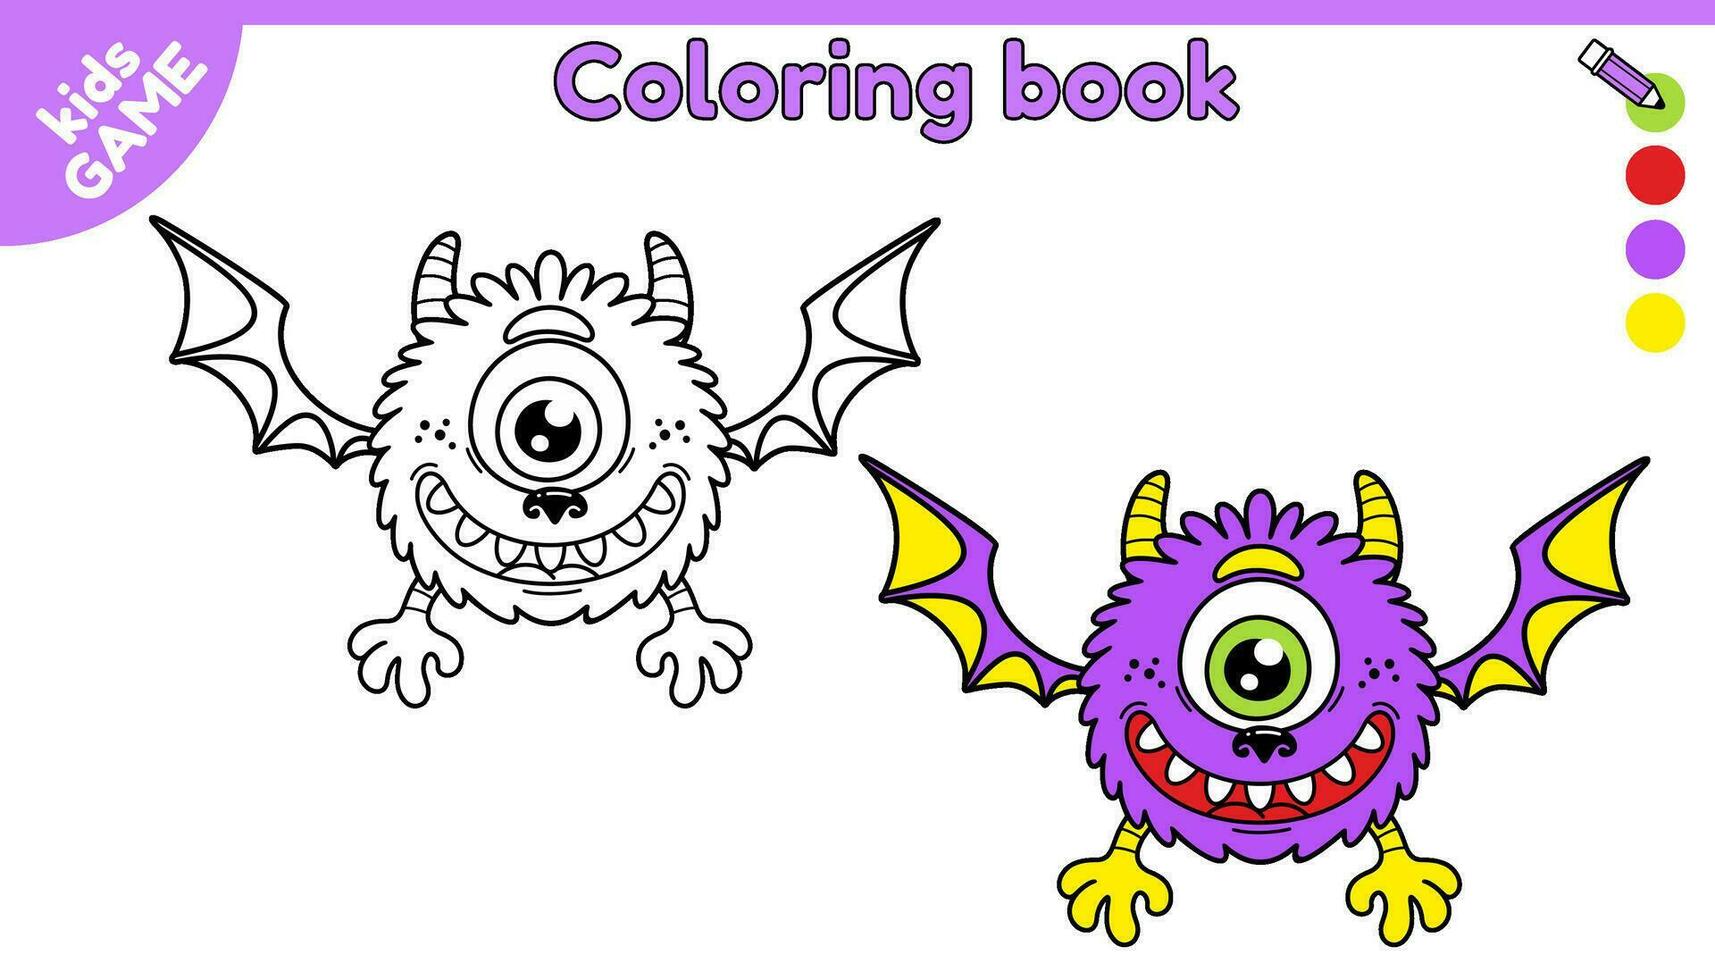 Page of coloring book for kids. Outline and color cartoon monster. Activity for preschool and school children. Painting task for child. Paint cute contour mutant. Vector black and white illustration.